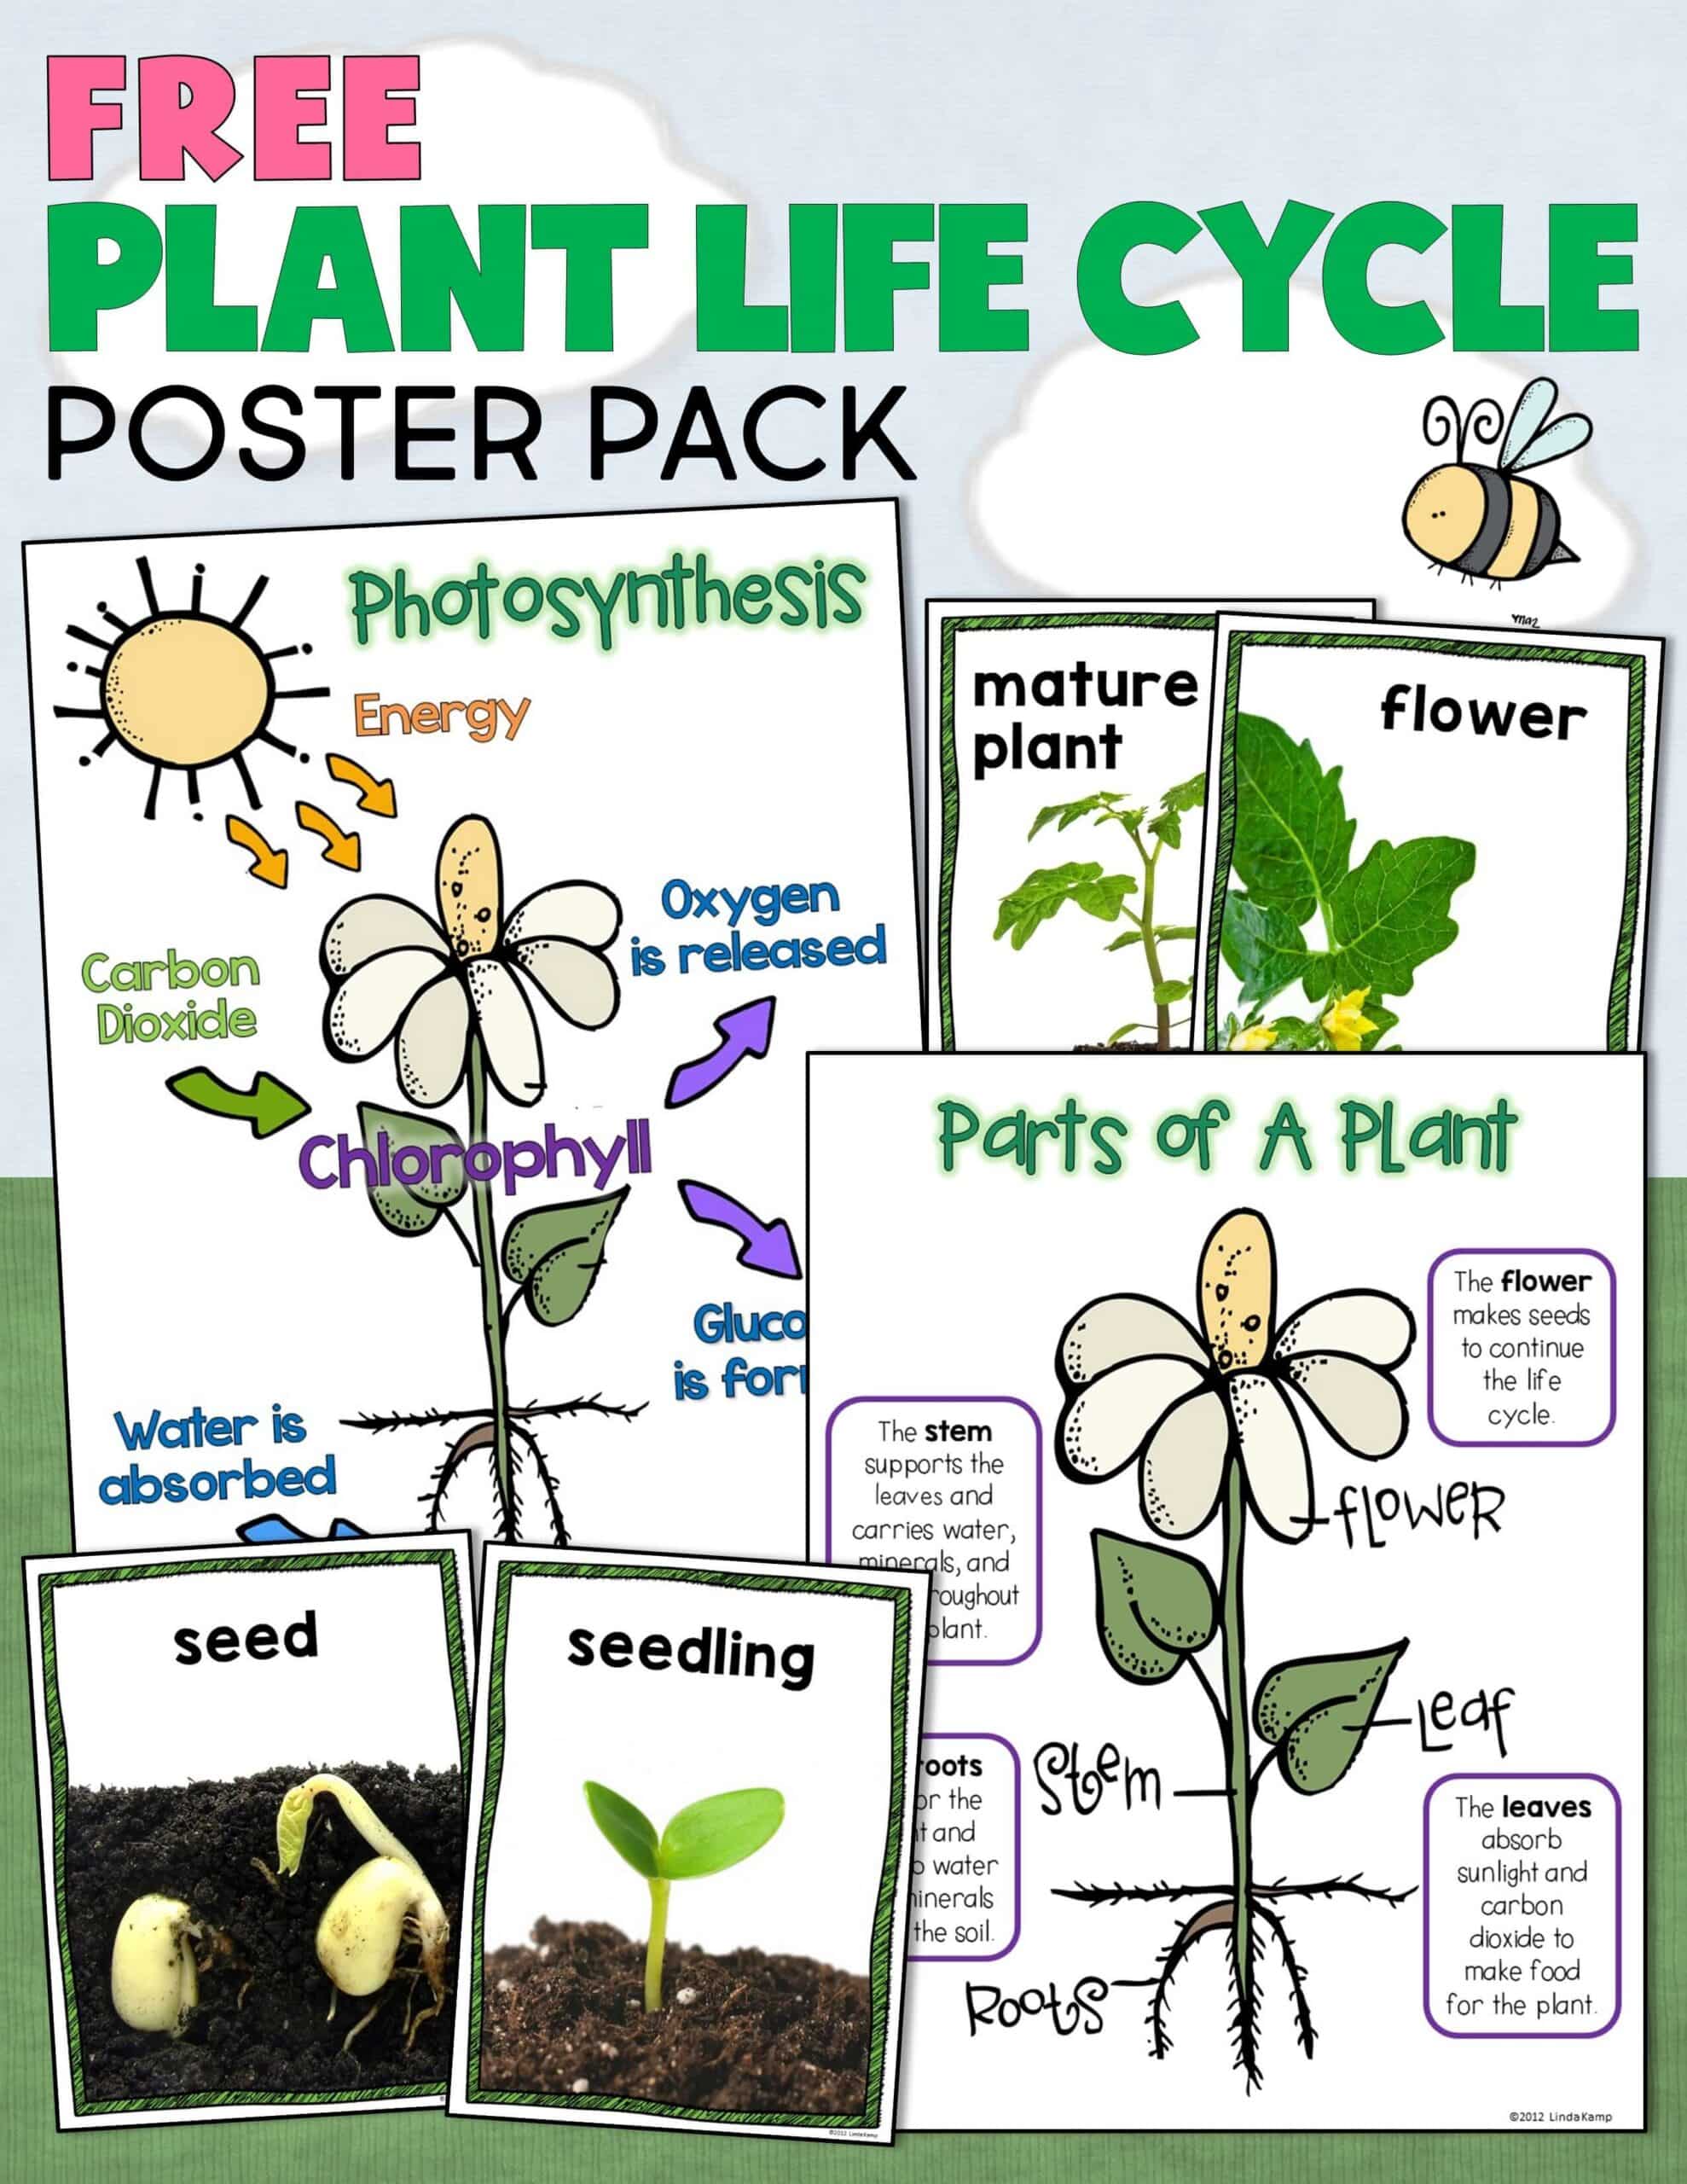 Free plant life cycle, parts of a plant, and photosynthesis posters.